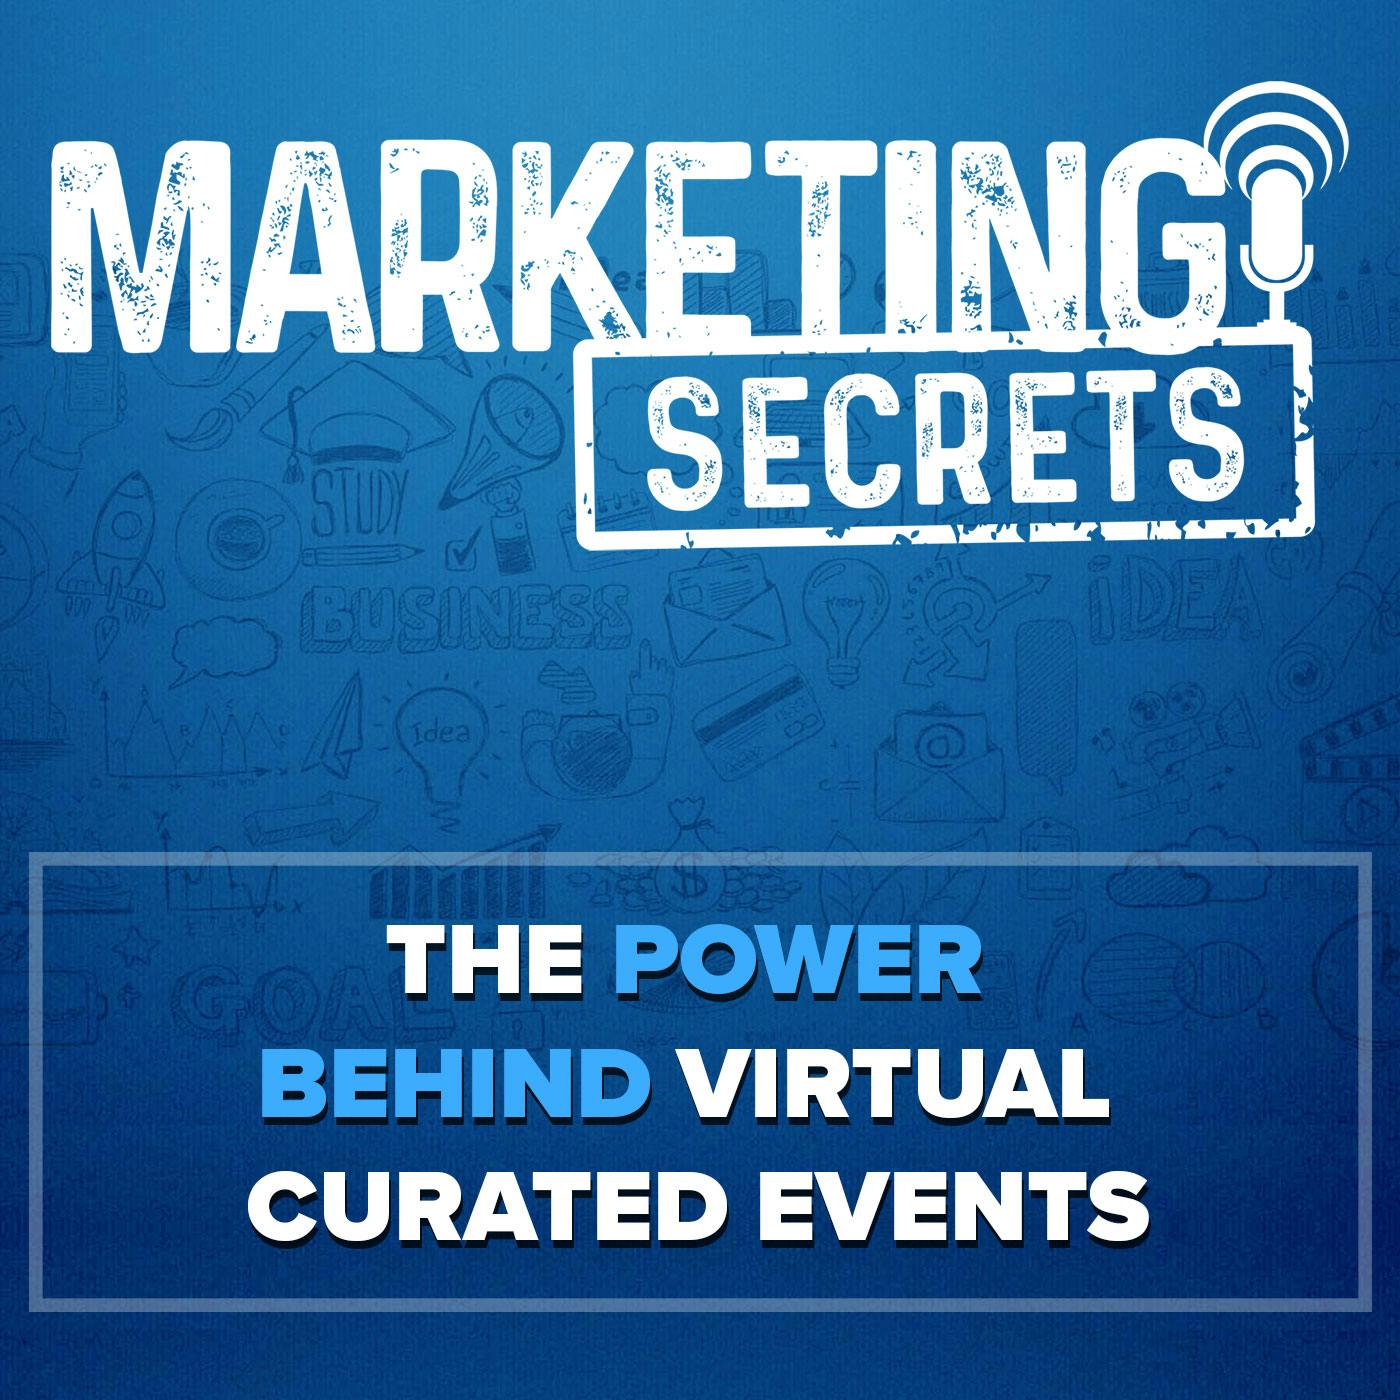 The Power Behind Virtual Curated Events